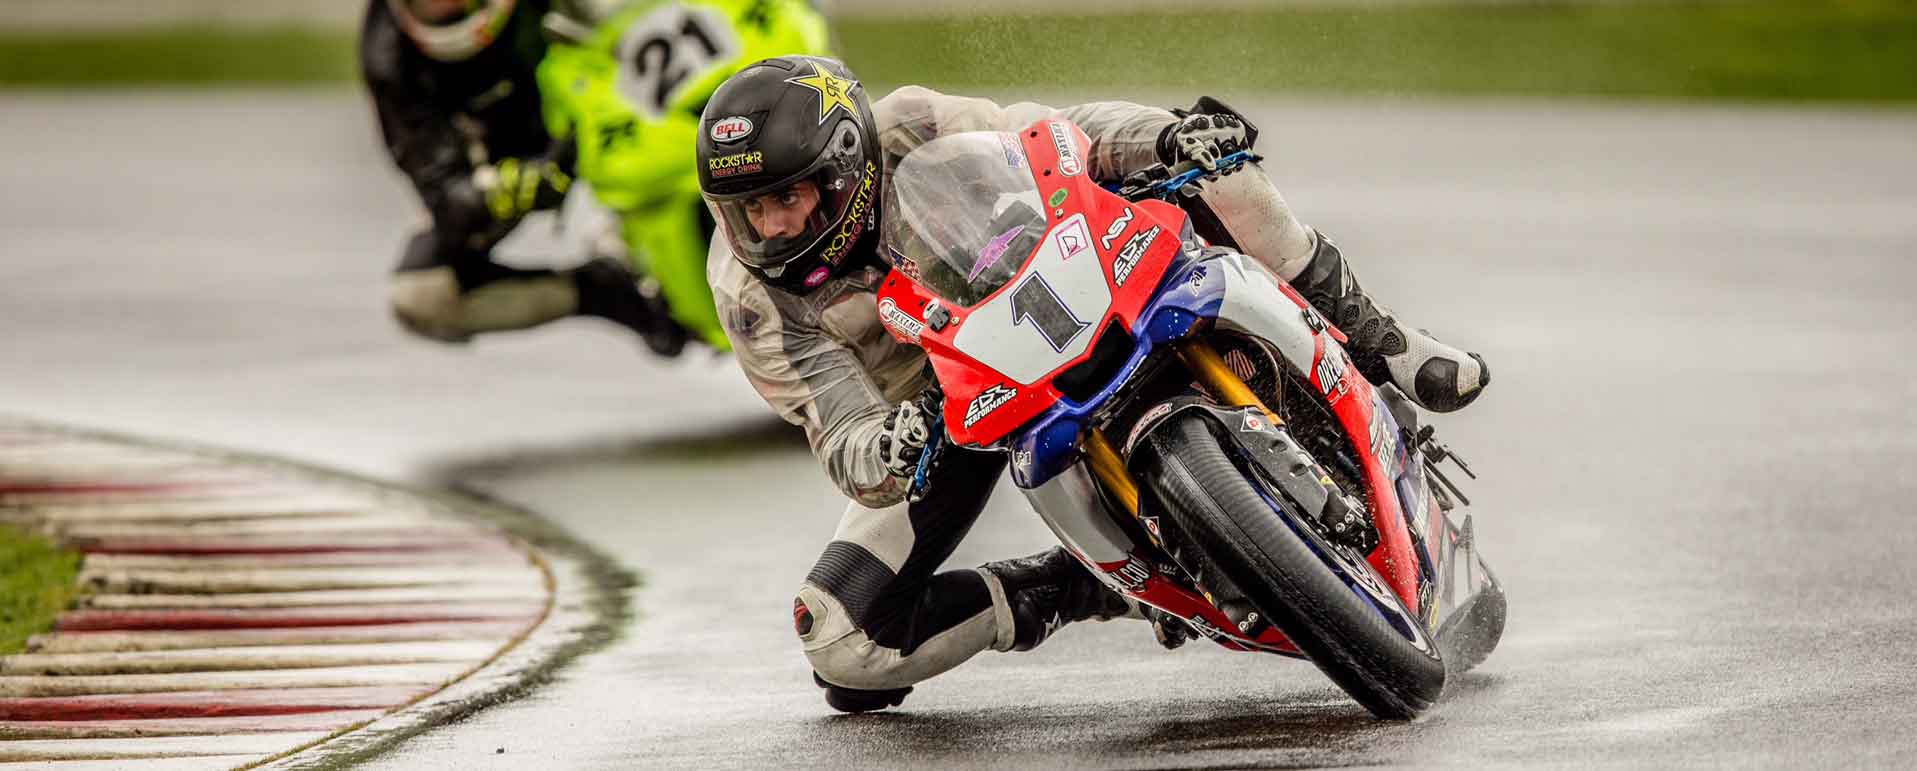 Andy DiBrino leaning hard into a turn at OMRRA round 1 at PIR in wet rainy conditions